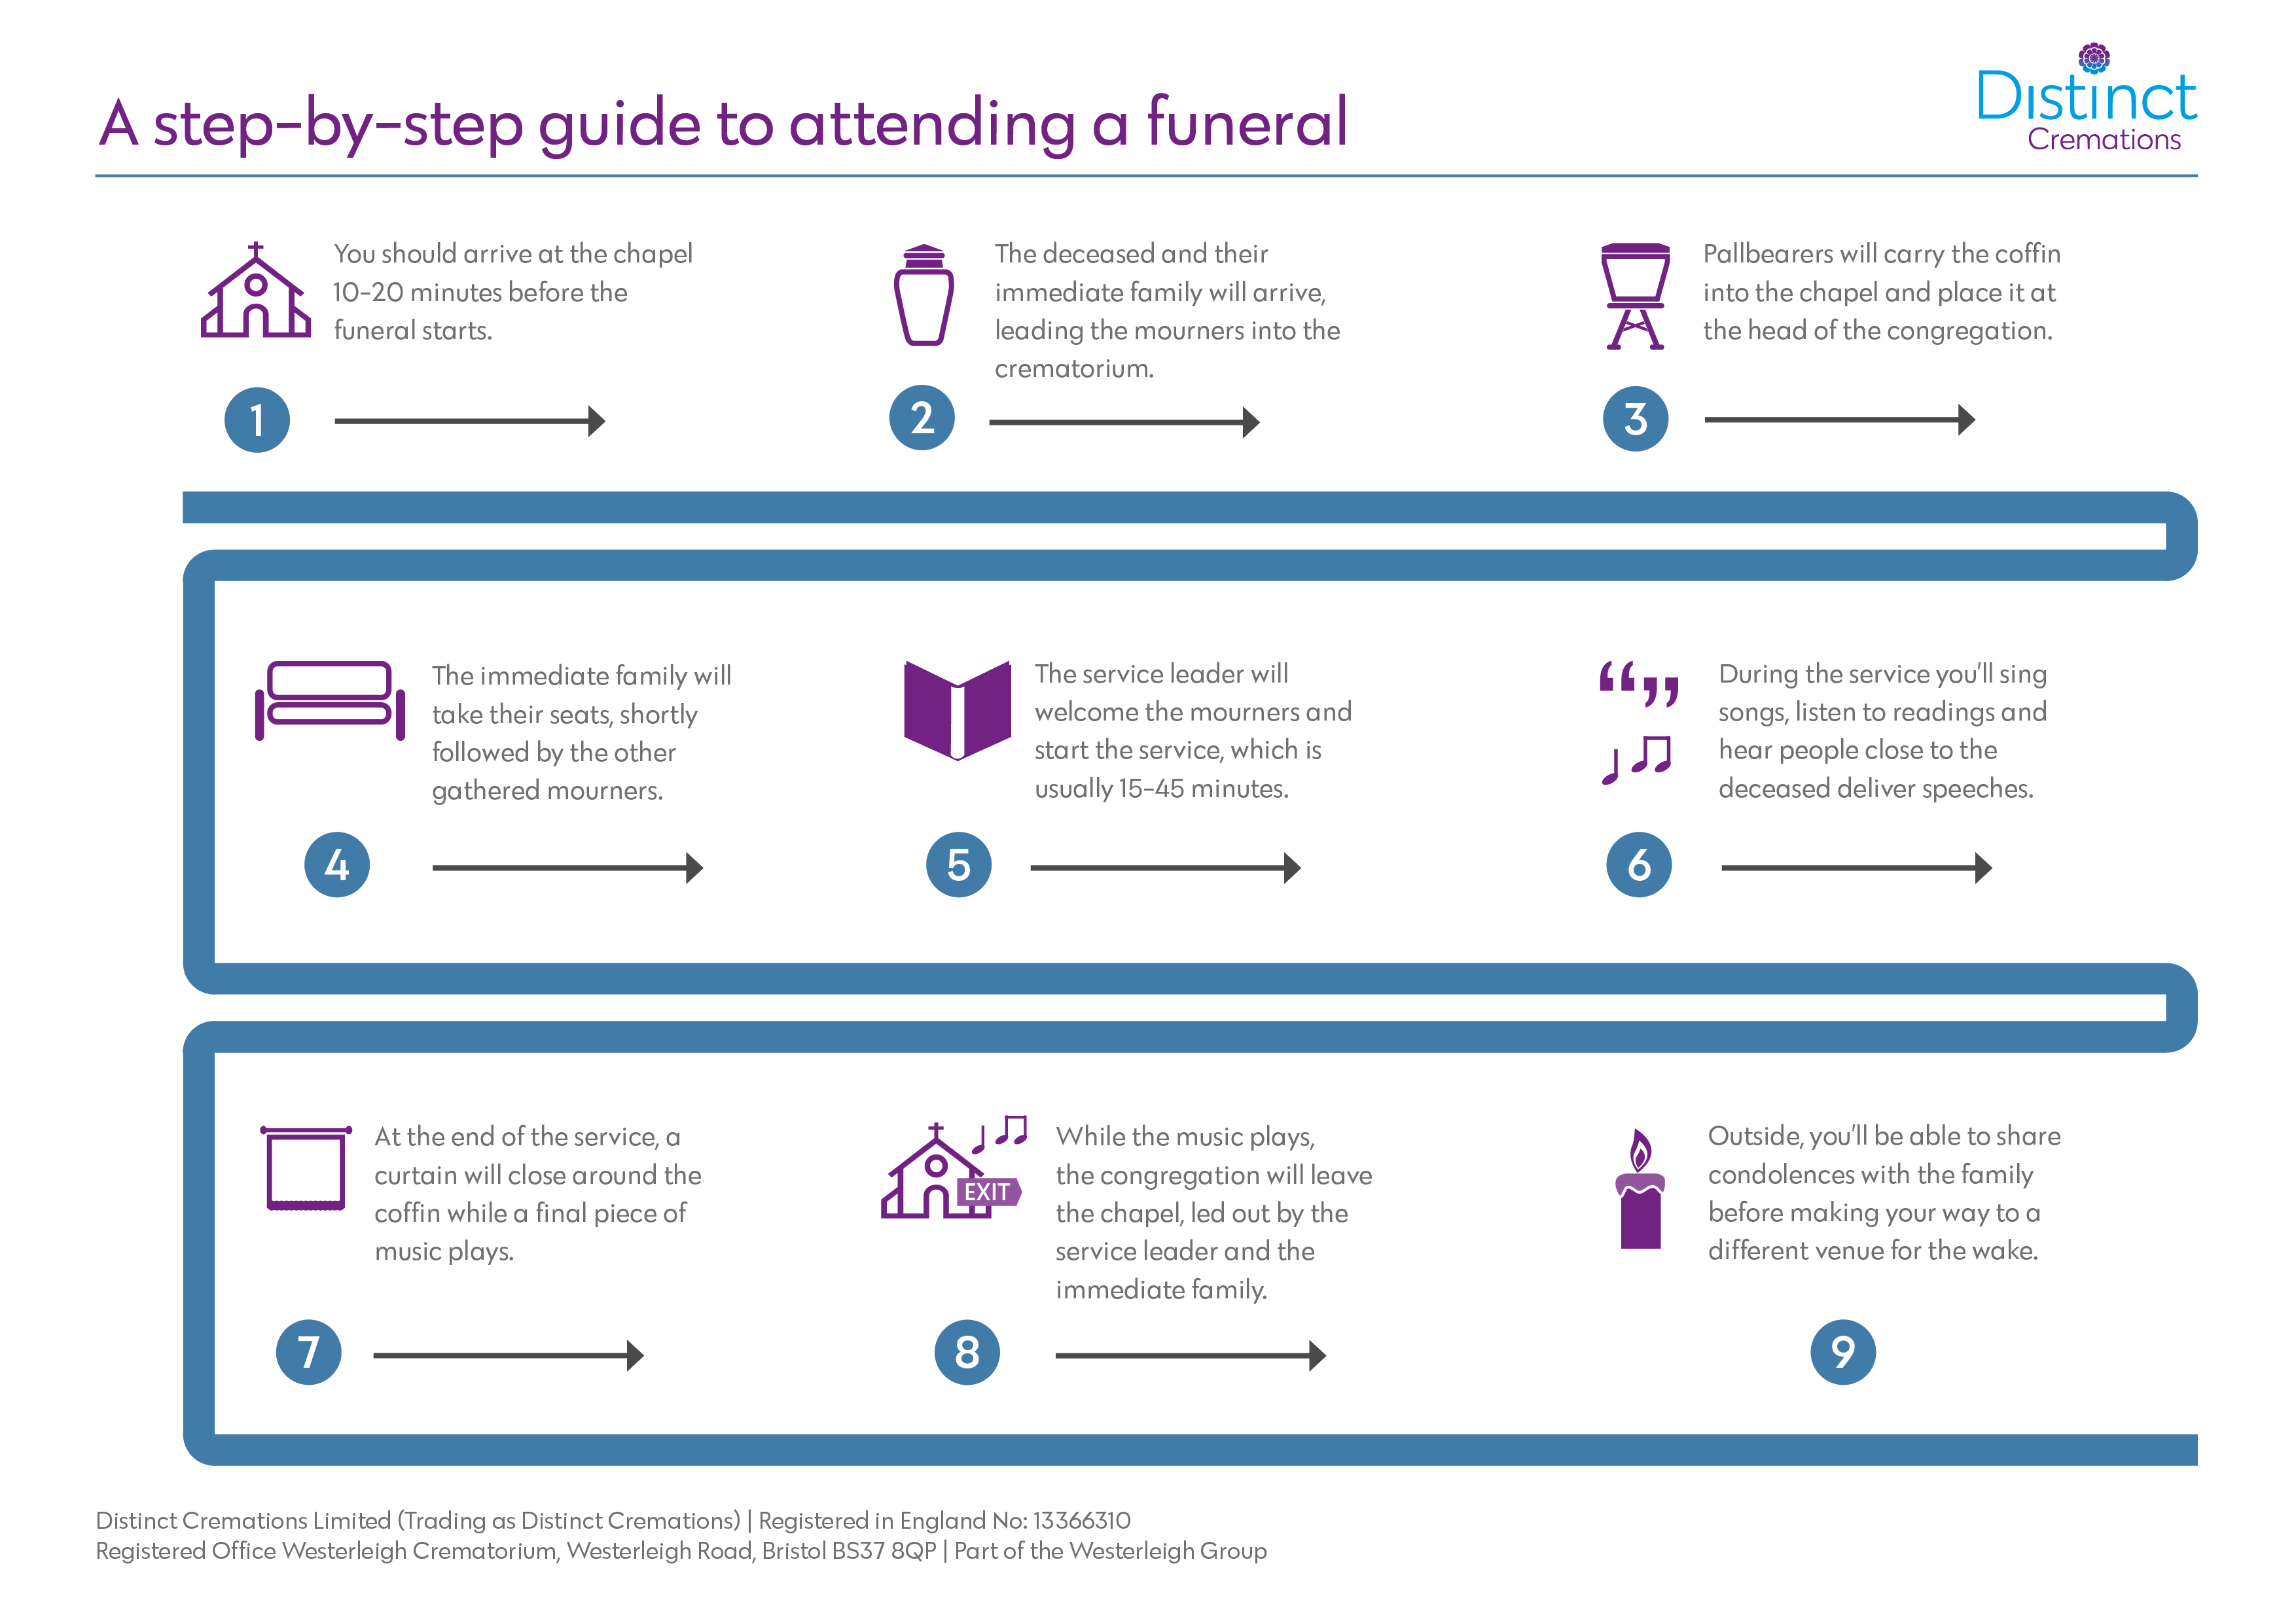 Step-by-step guide to attending a funeral